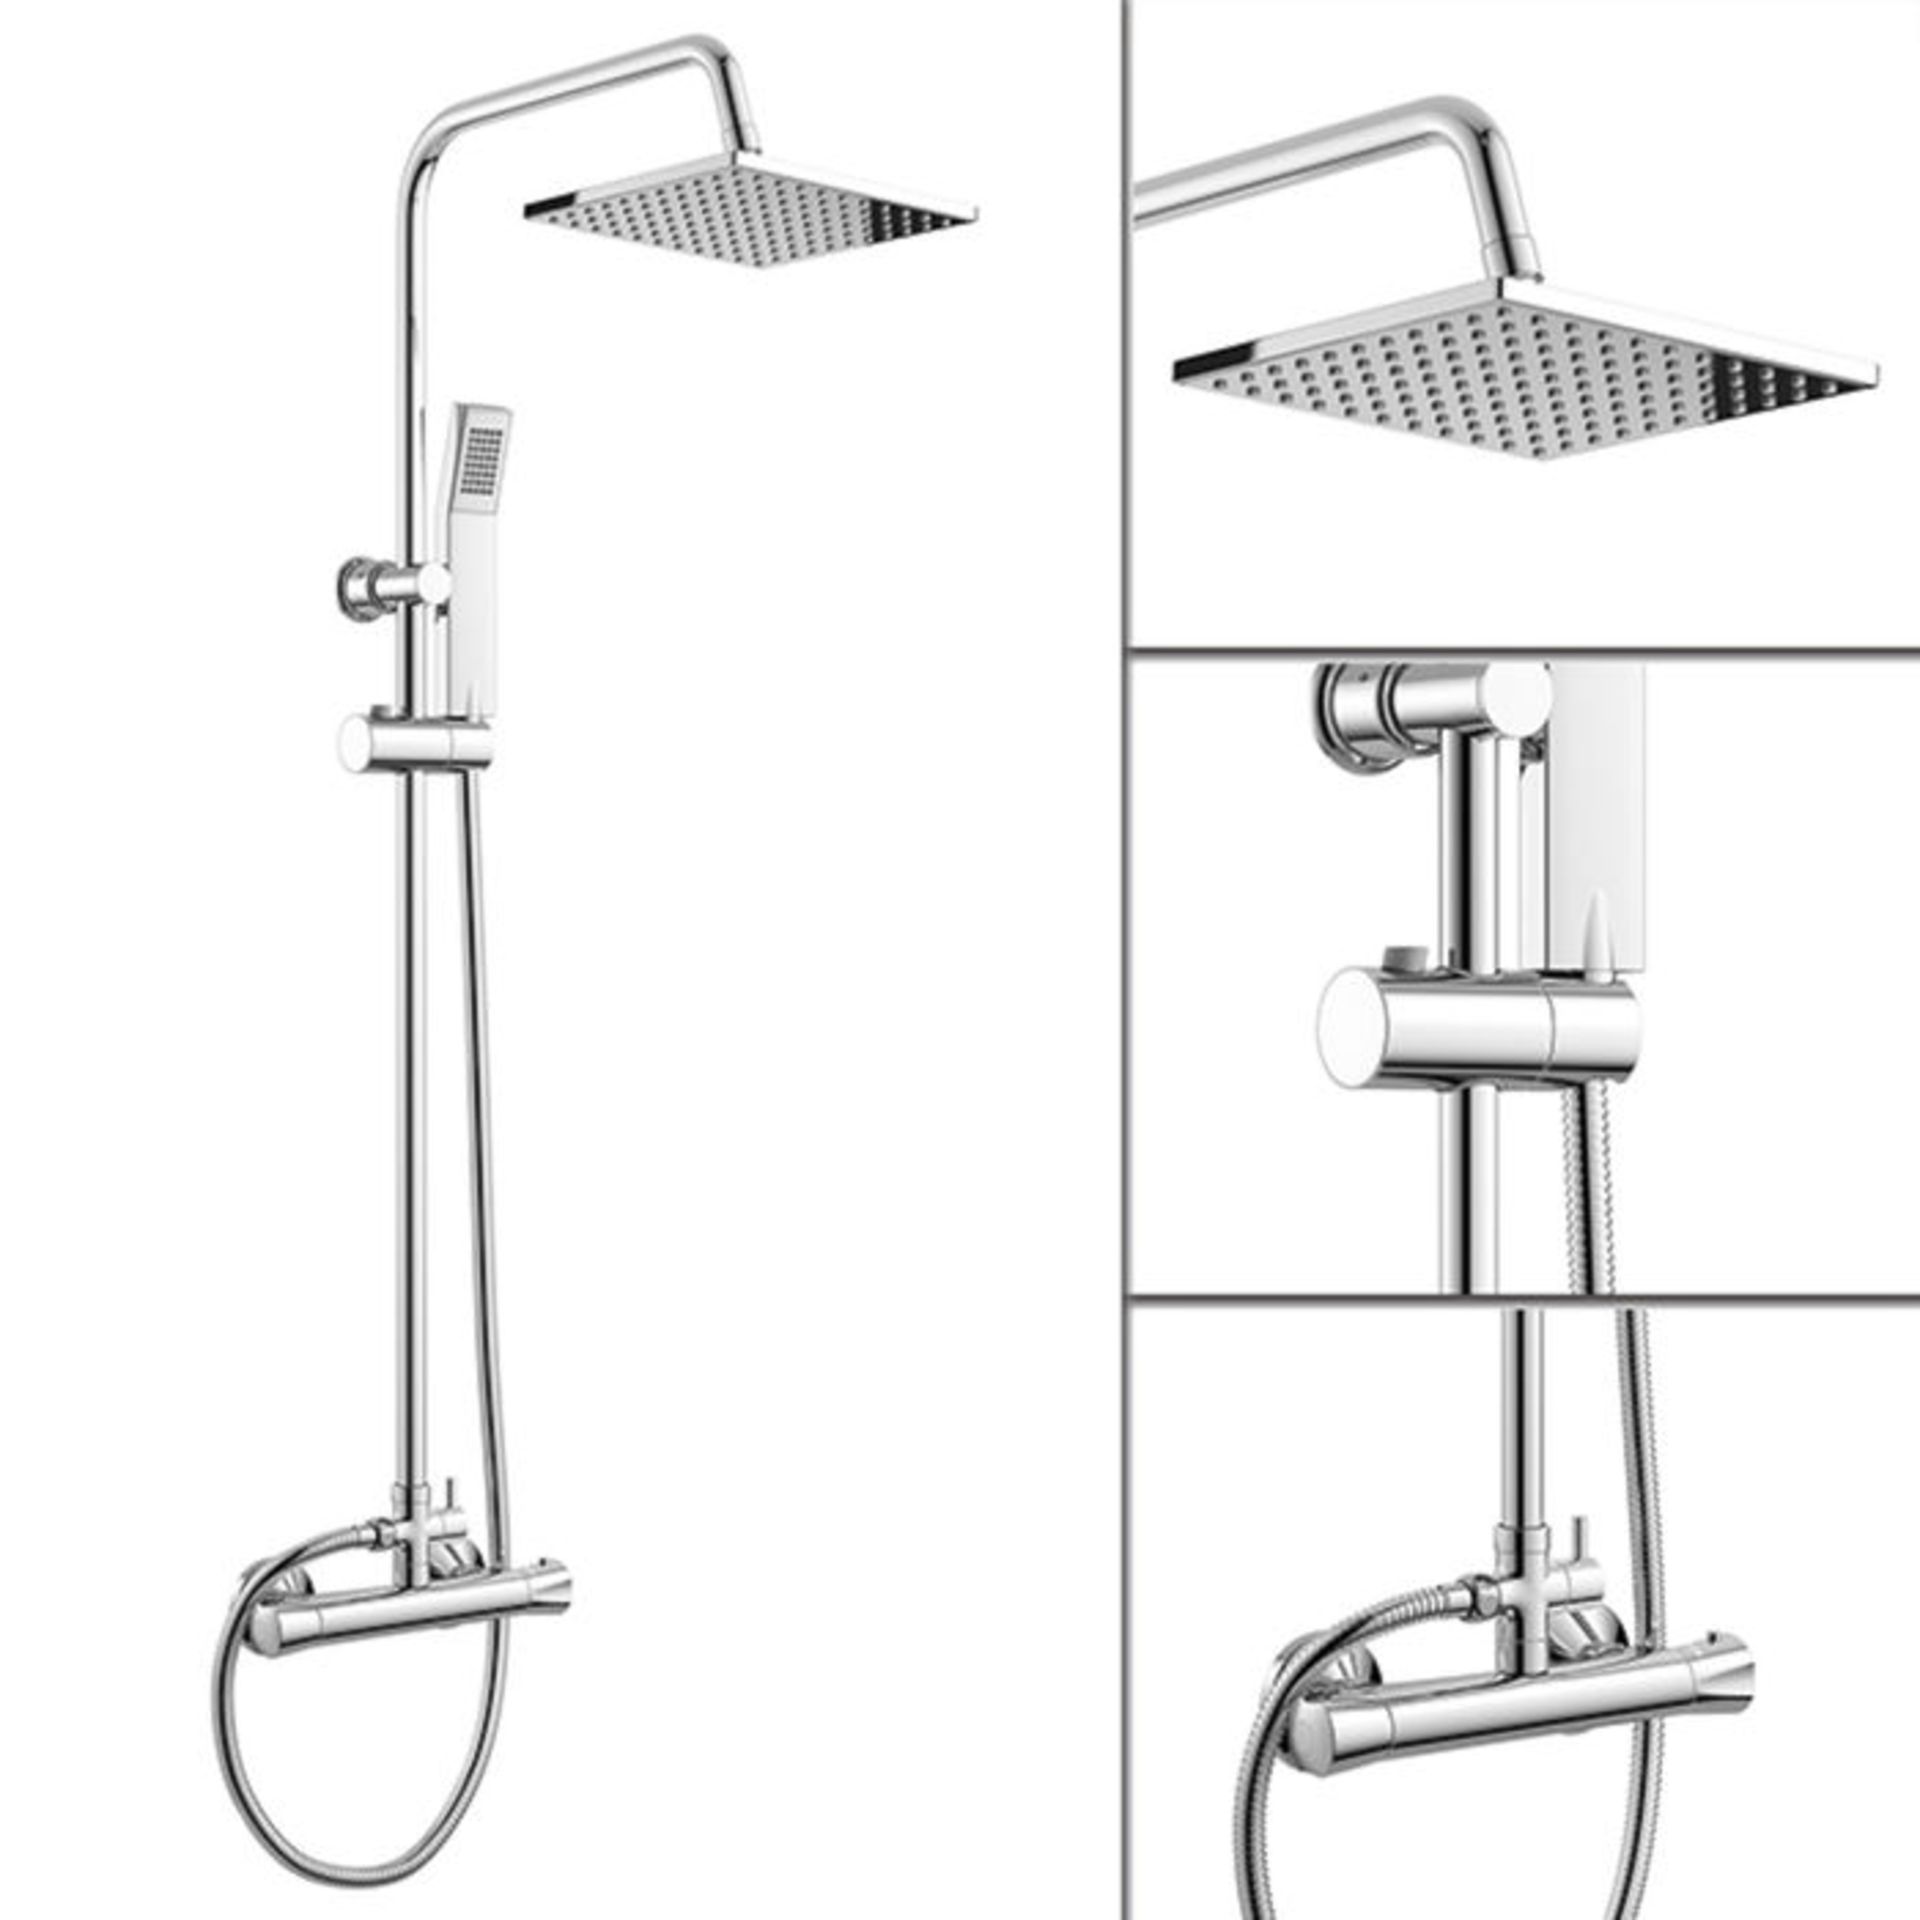 (SM2) Square Exposed Thermostatic Shower Kit & Head. Curved features and contemporary rounded valves - Bild 2 aus 2